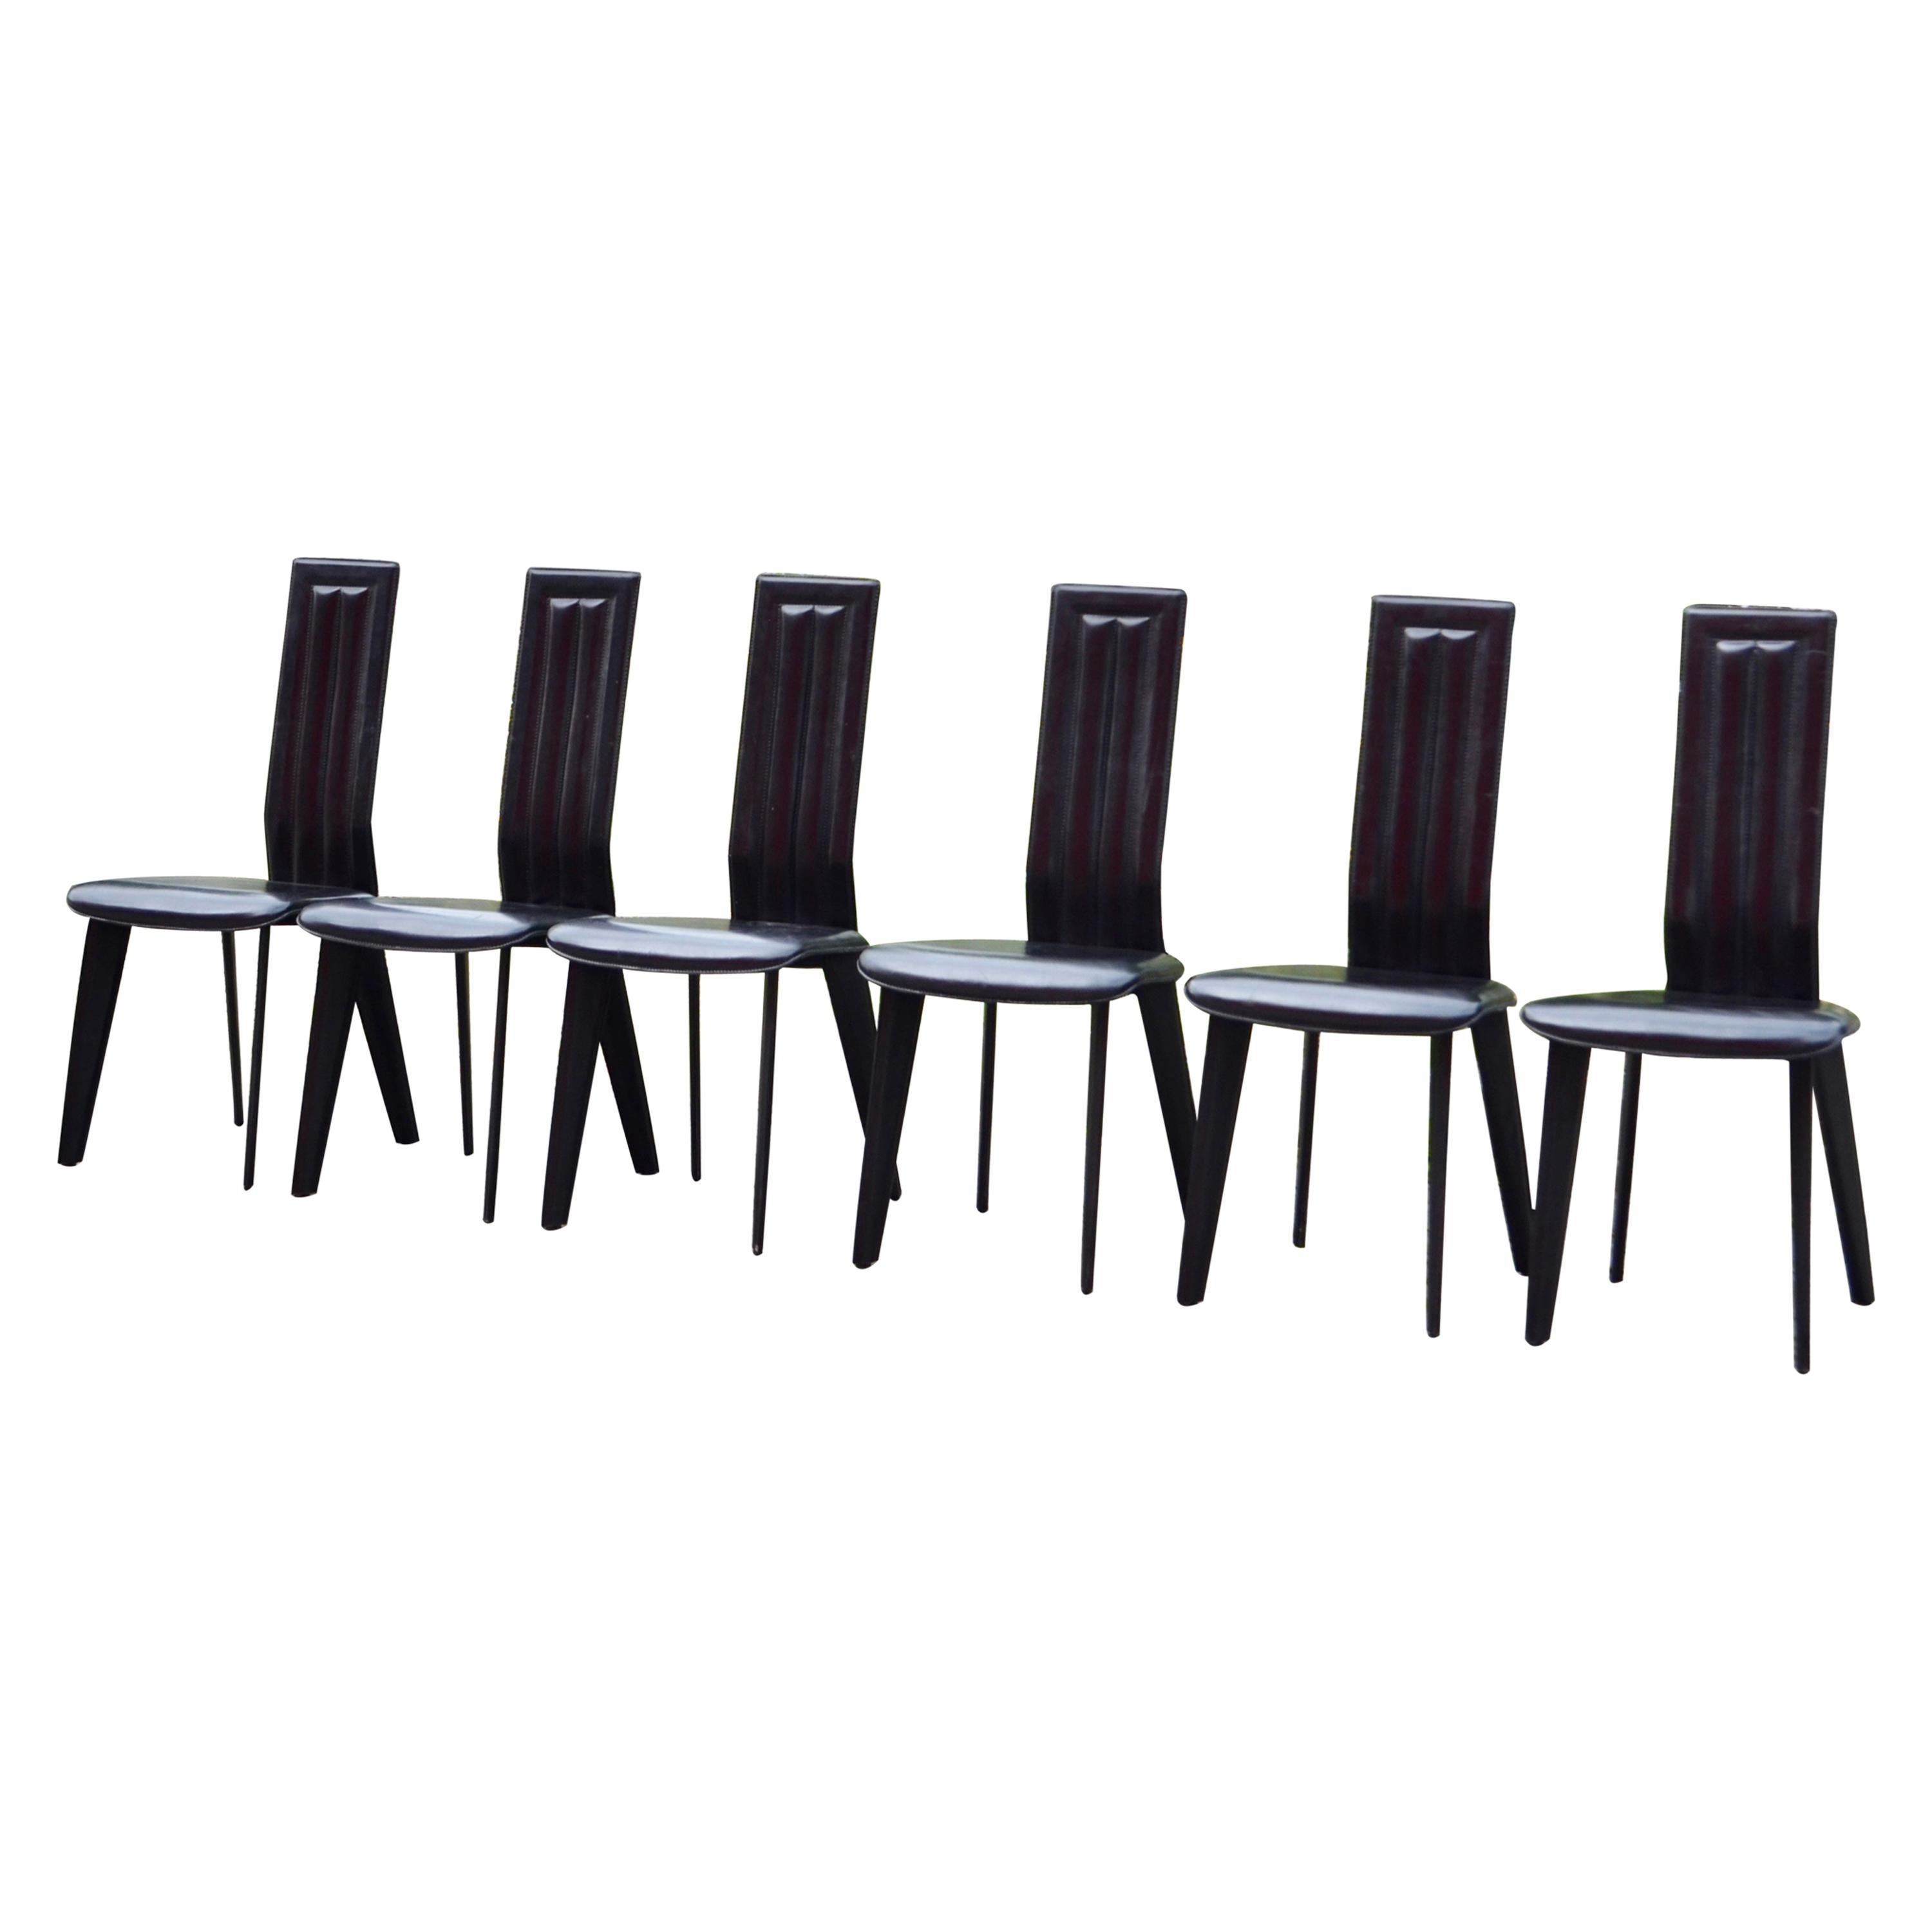 Naos Black Saddle Leather Dining Chairs Italy Design Set of 6